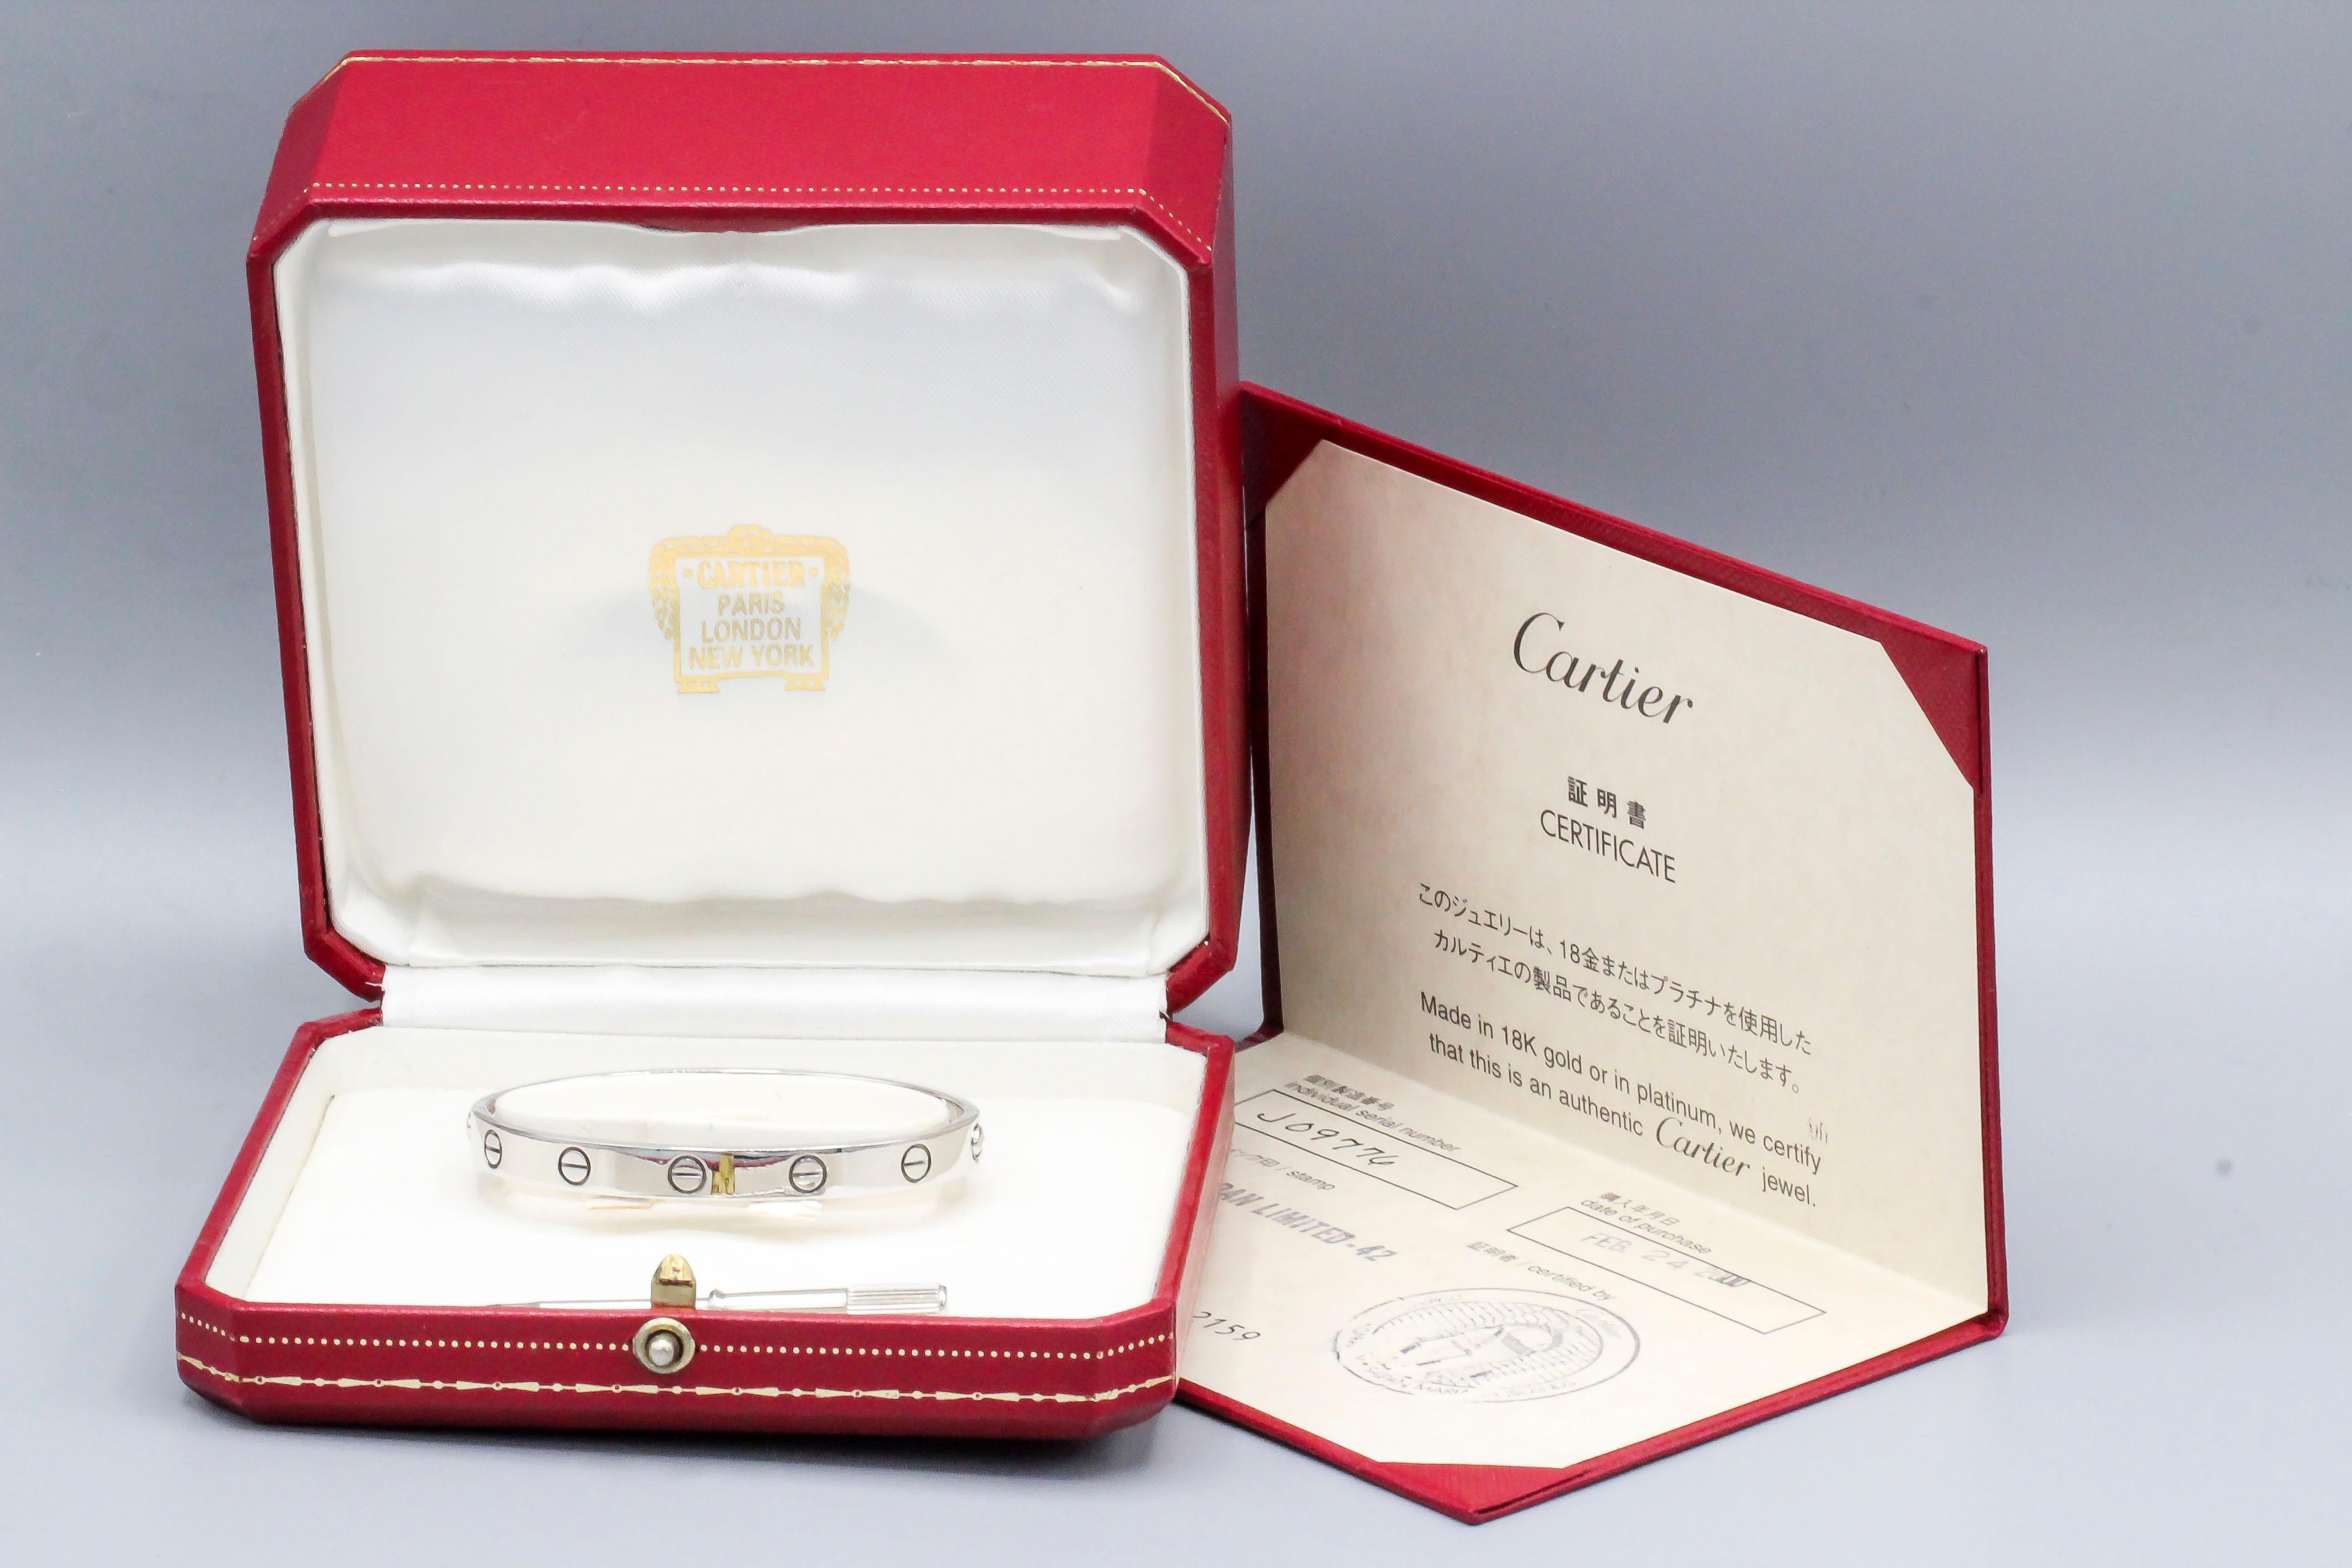 Classic 18k white gold Cartier Love bracelet.  It is a size 16, comes with the screwdriver and box, as well as Cartier certificate.  Current retail $6750

Hallmarks: Cartier 1993, 750, reference numbers, 16